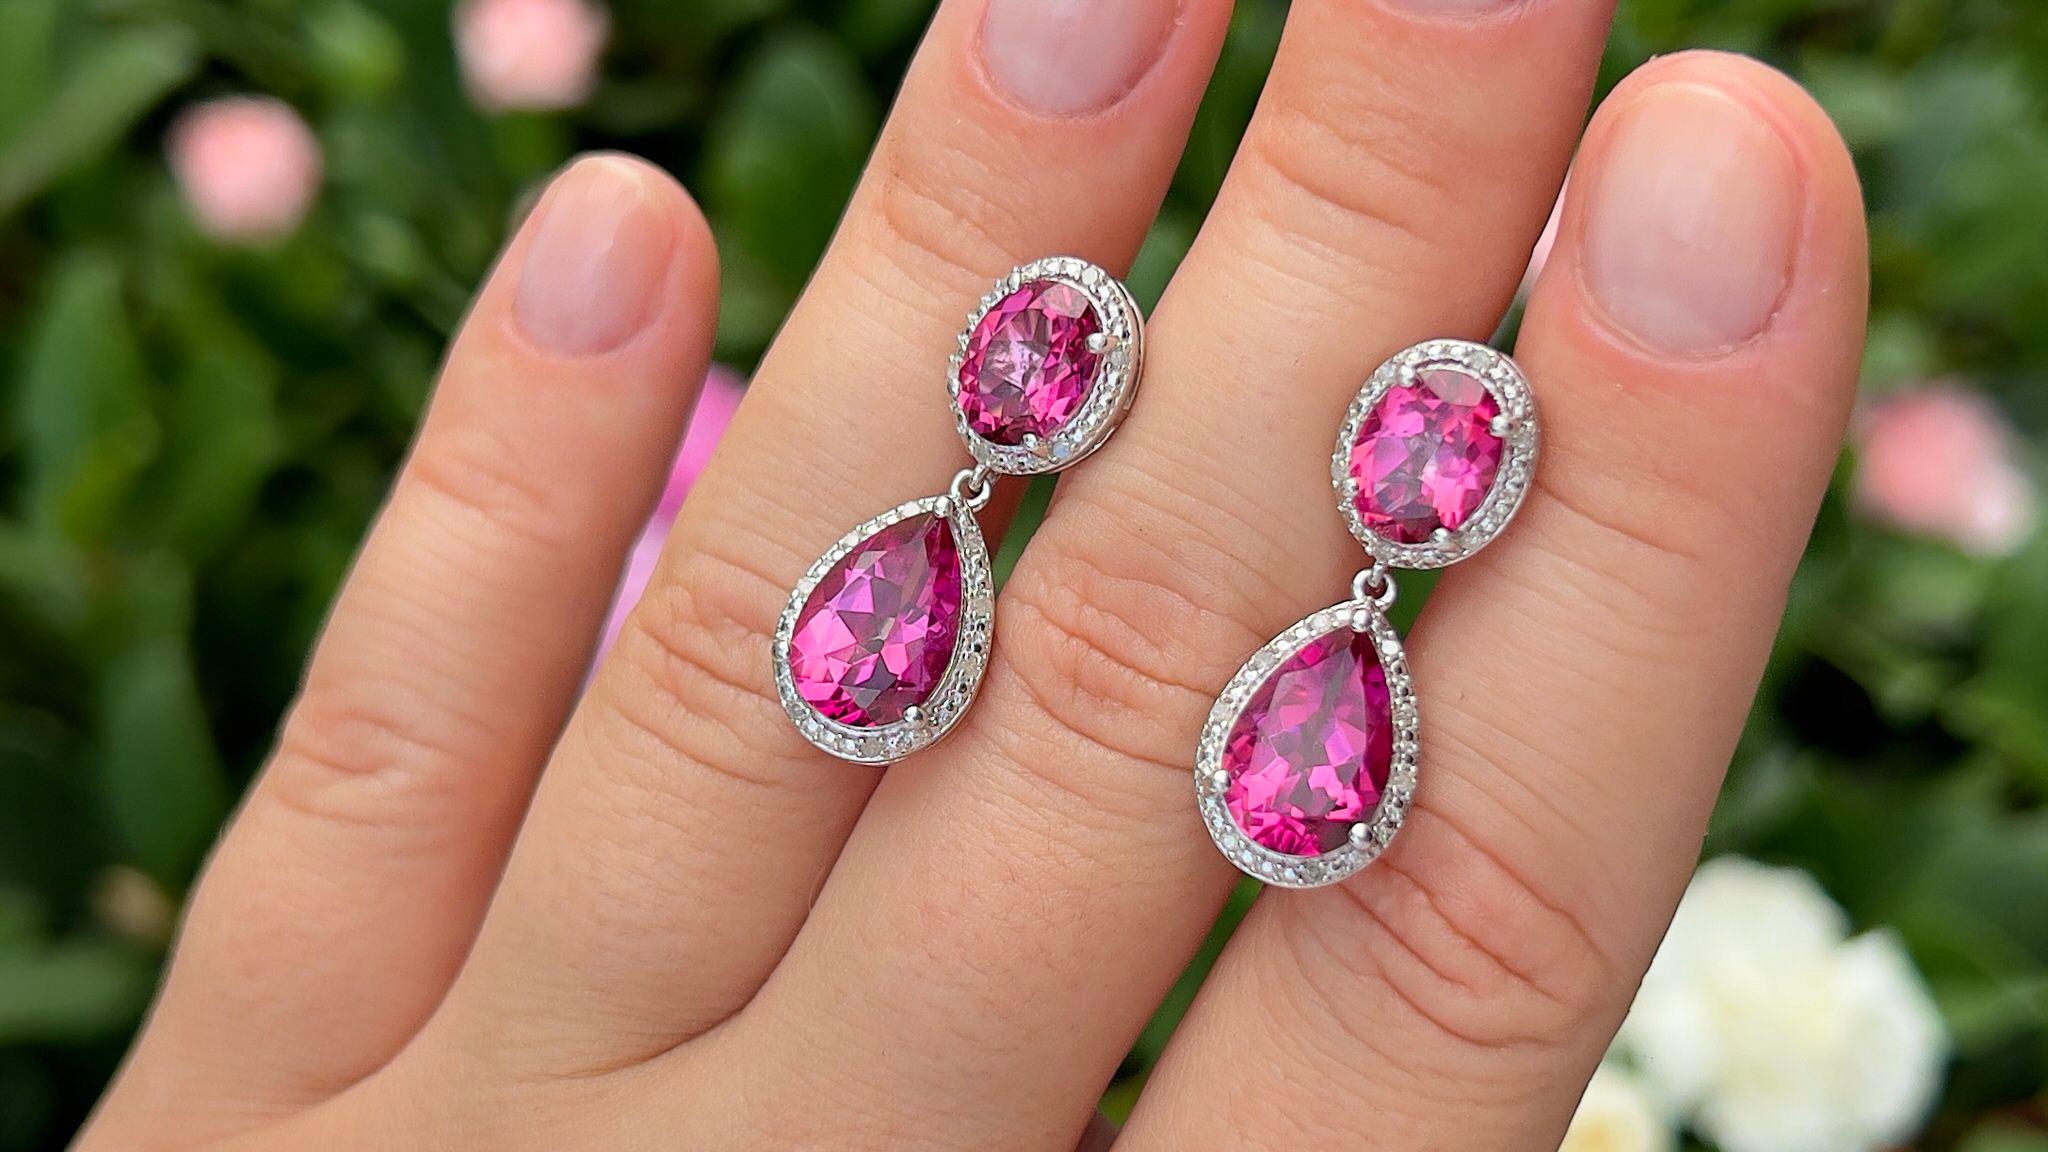 Hot Pink Topaz Earrings Diamond Setting 11.35 Carats Total In Excellent Condition For Sale In Laguna Niguel, CA